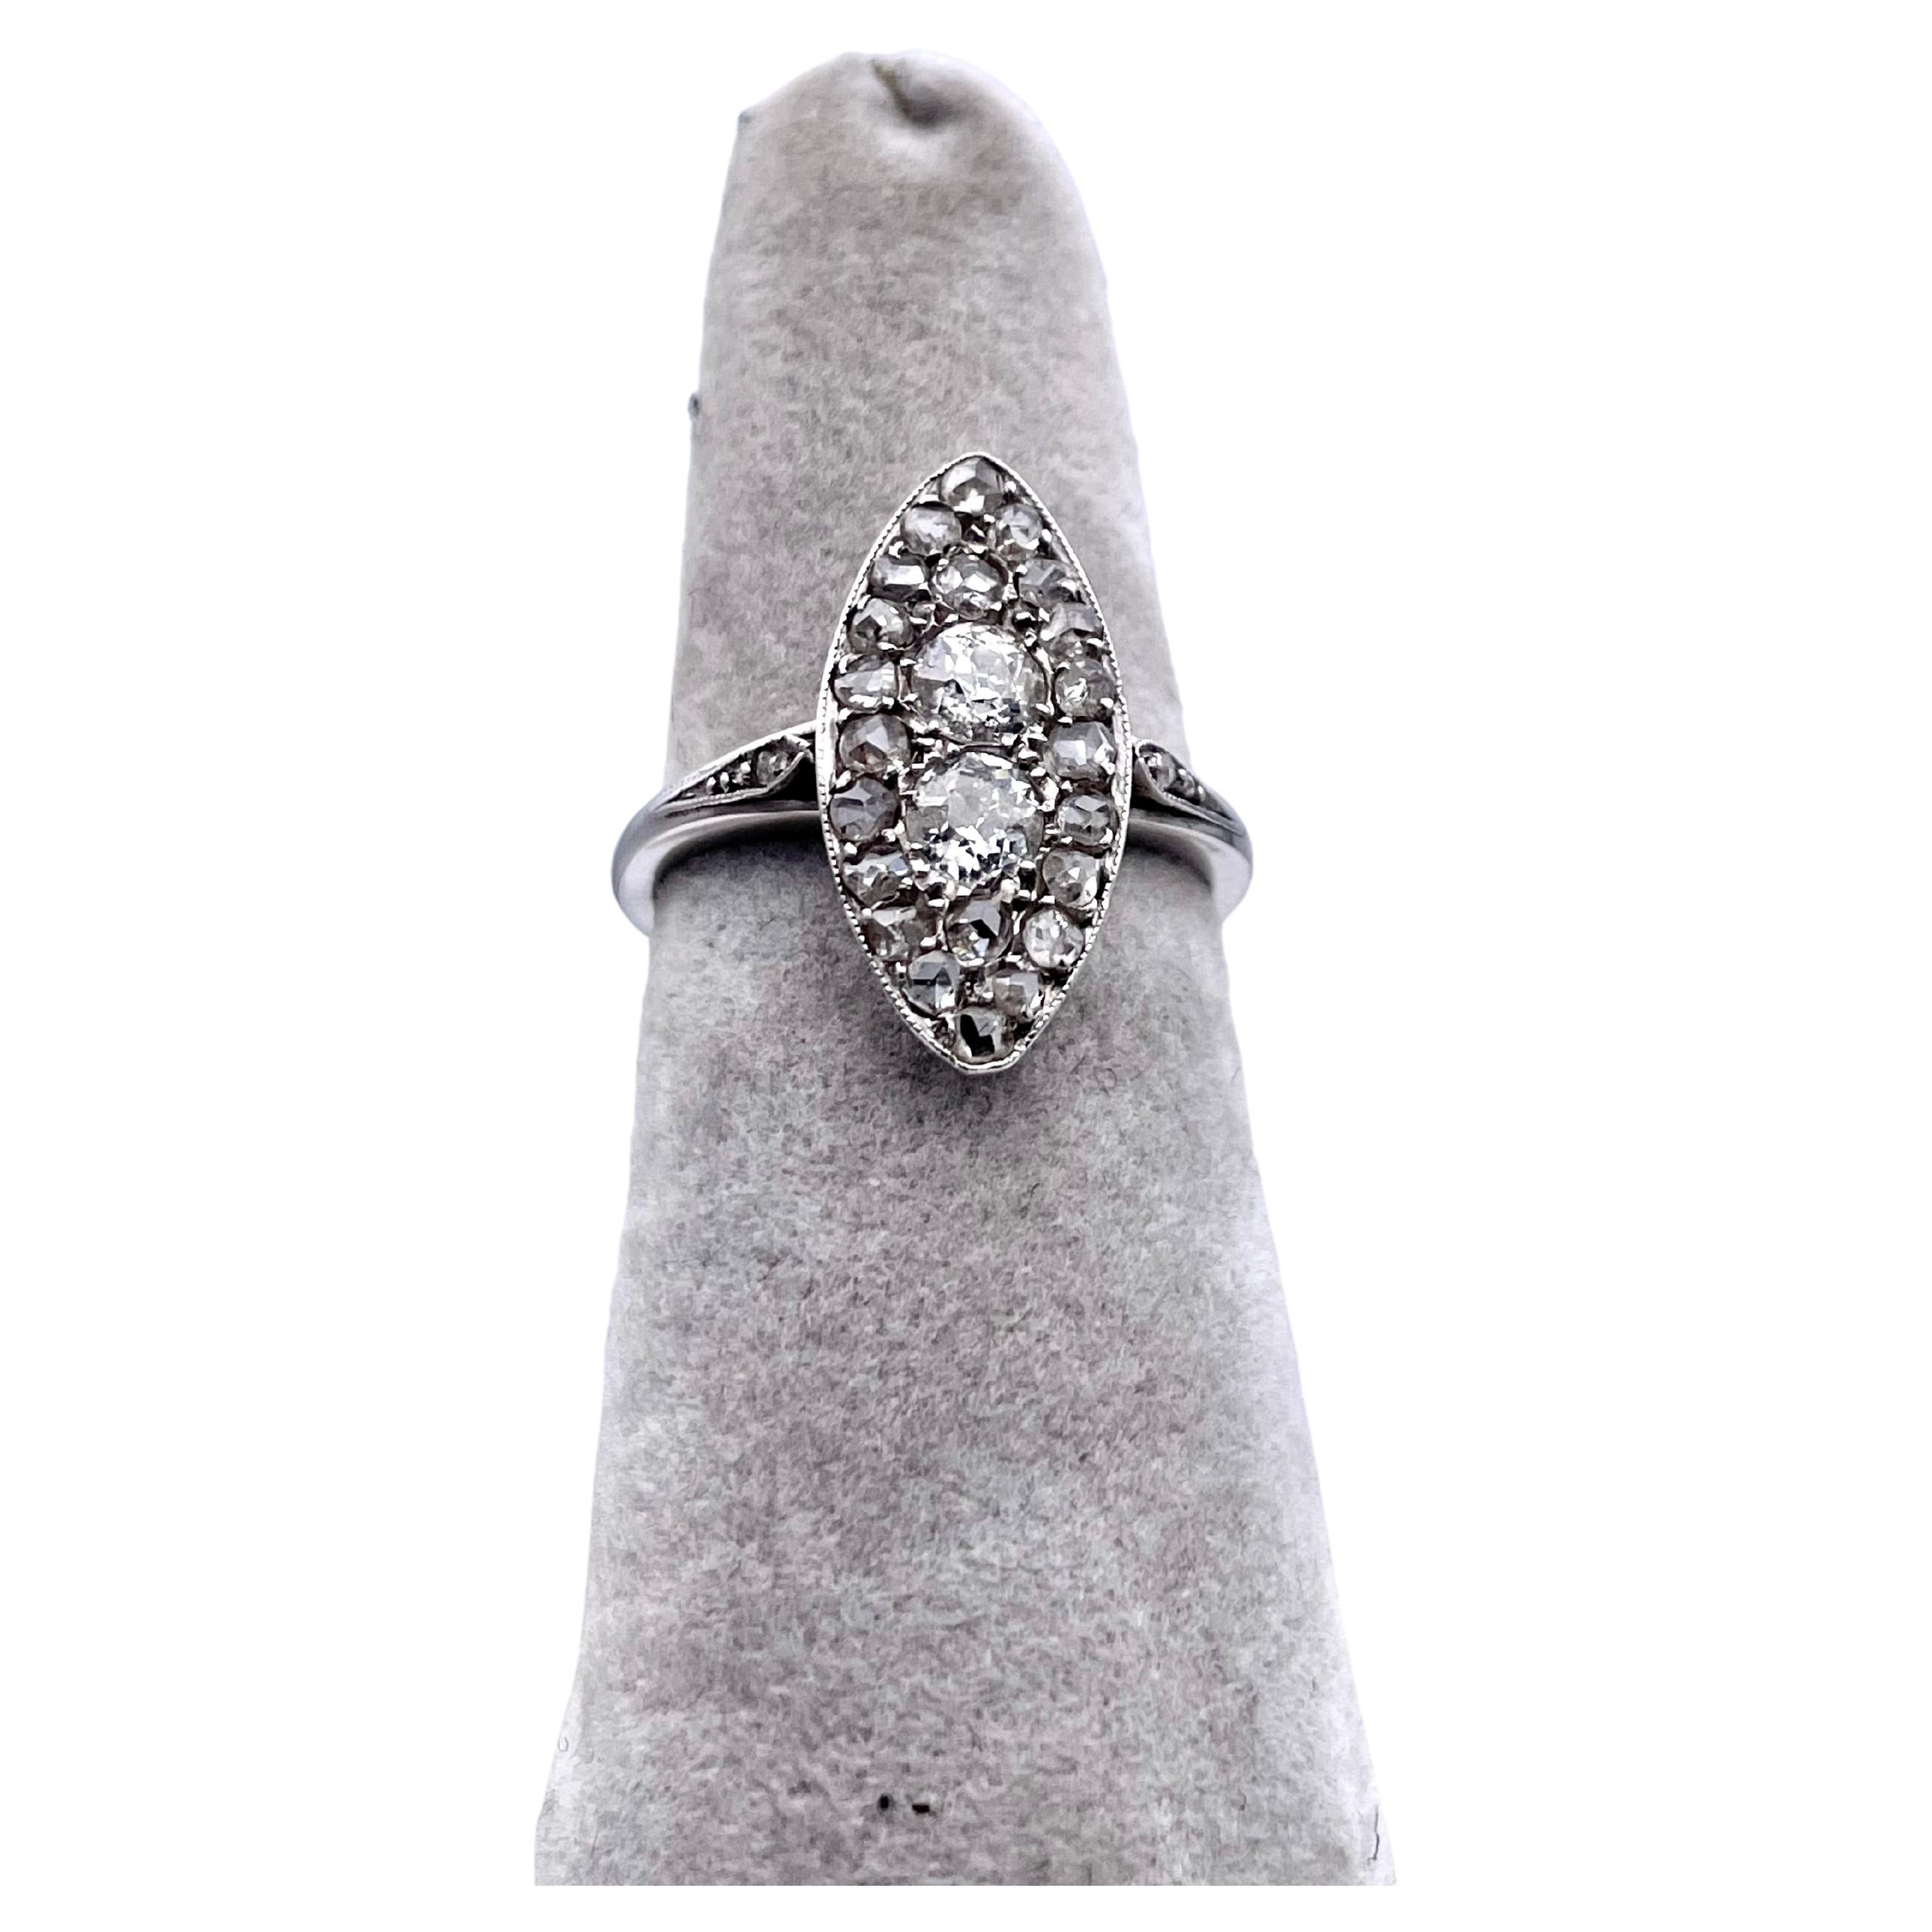 Lovely long tapered marquis-cut ring.  Approximately  carats of rose-cut diamonds. Tapered rose diamonds are set on the shoulders.  The ring is set in platinum. Size 5 1/2 and can be custom-sized.  A lovely distinctive look; an allover soft shimmer.